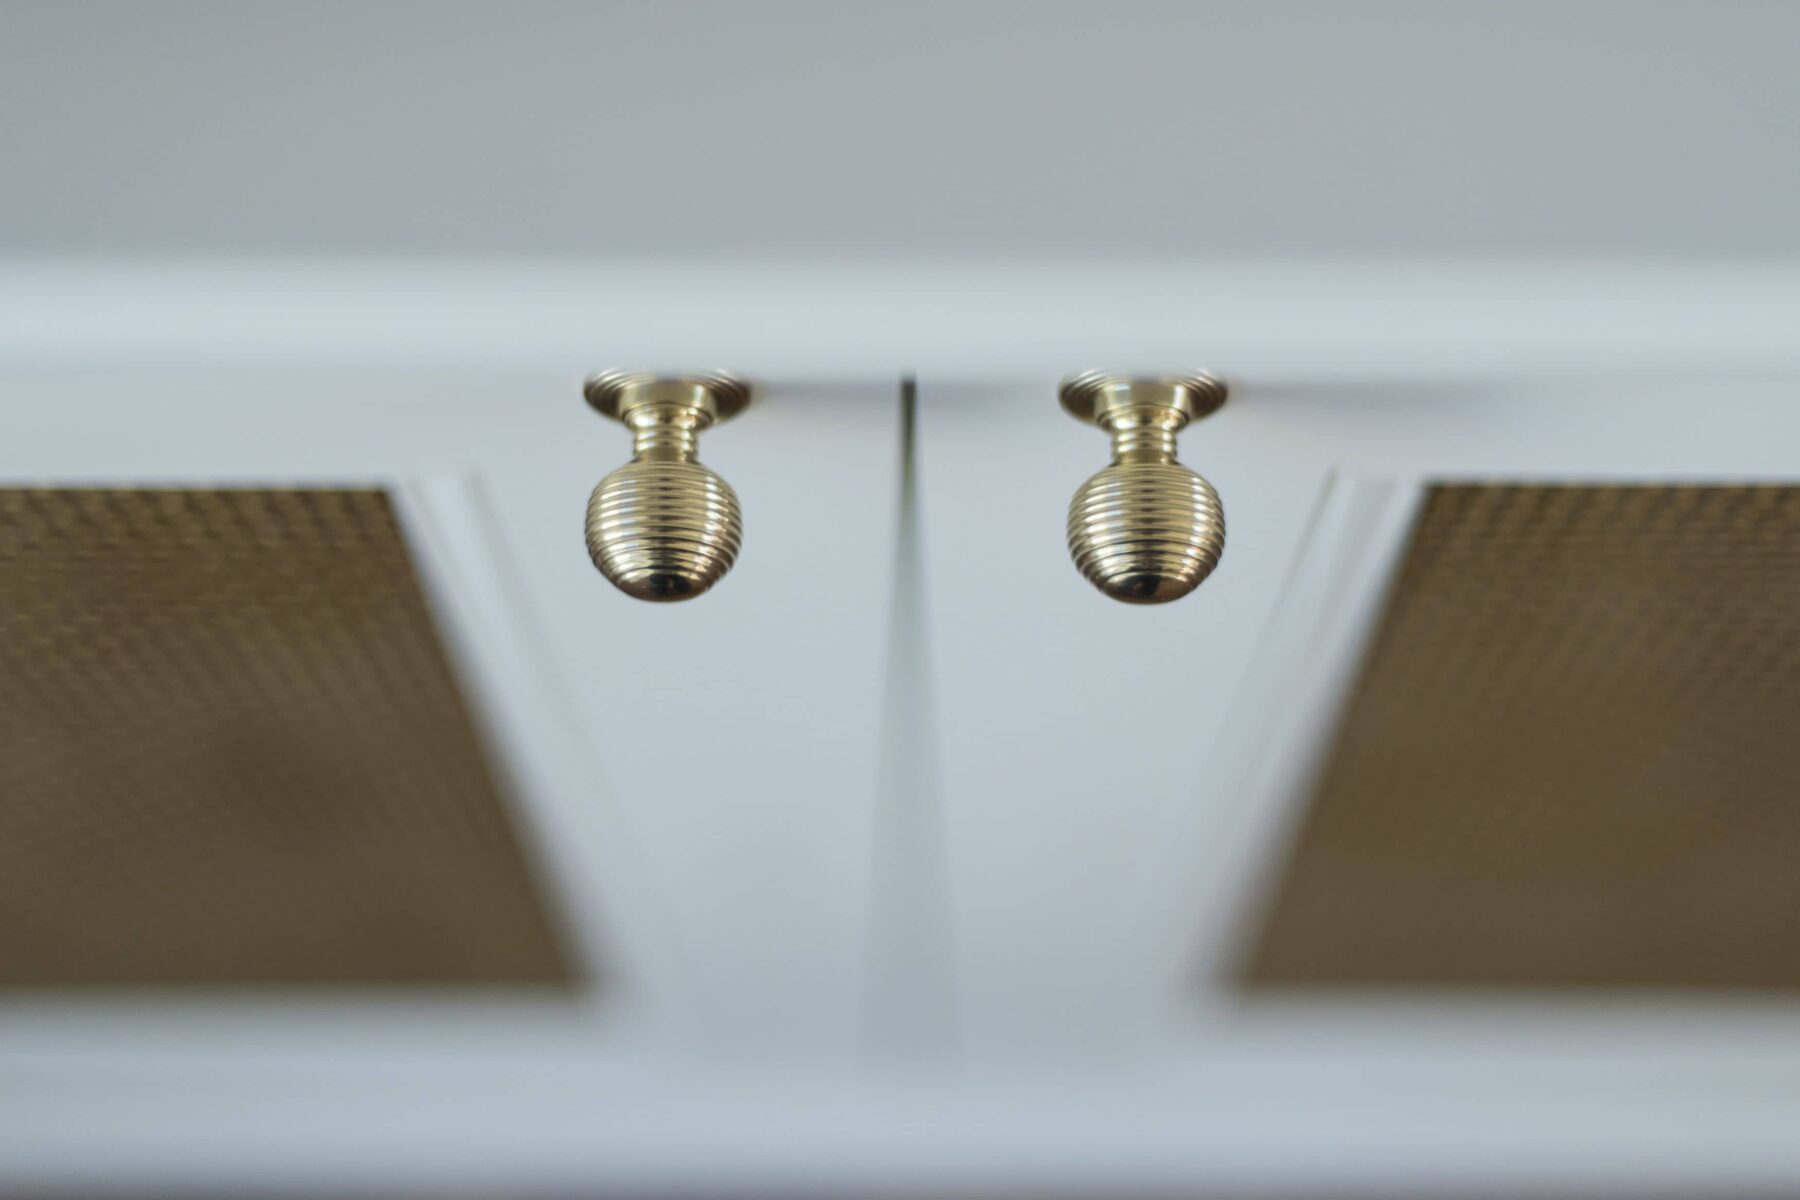 White cabinets with gold knob handles